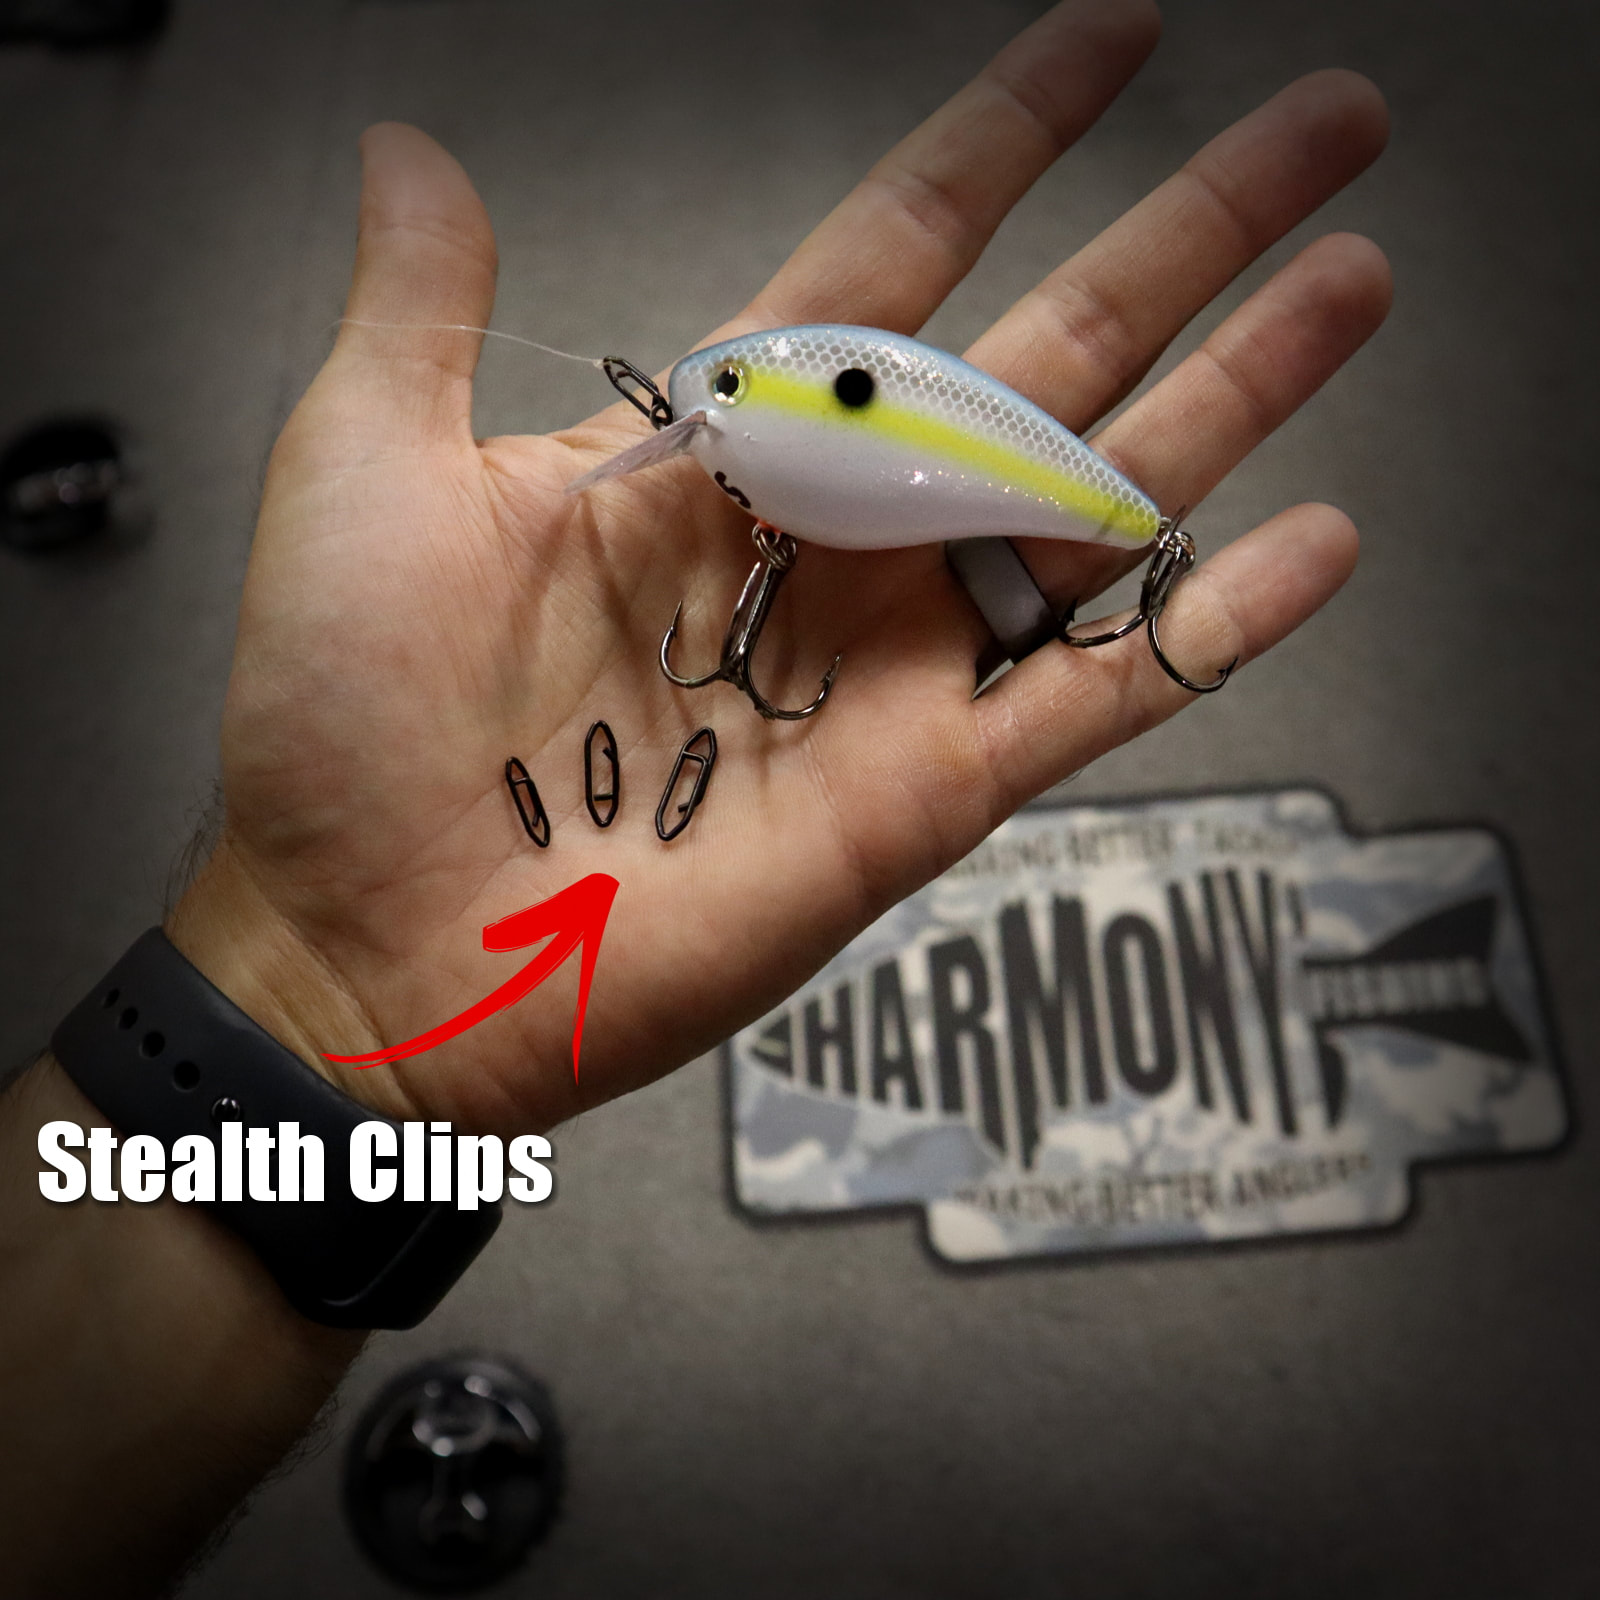 Harmony Fishing Stealth Clips (25 Pack) [Black Stainless]